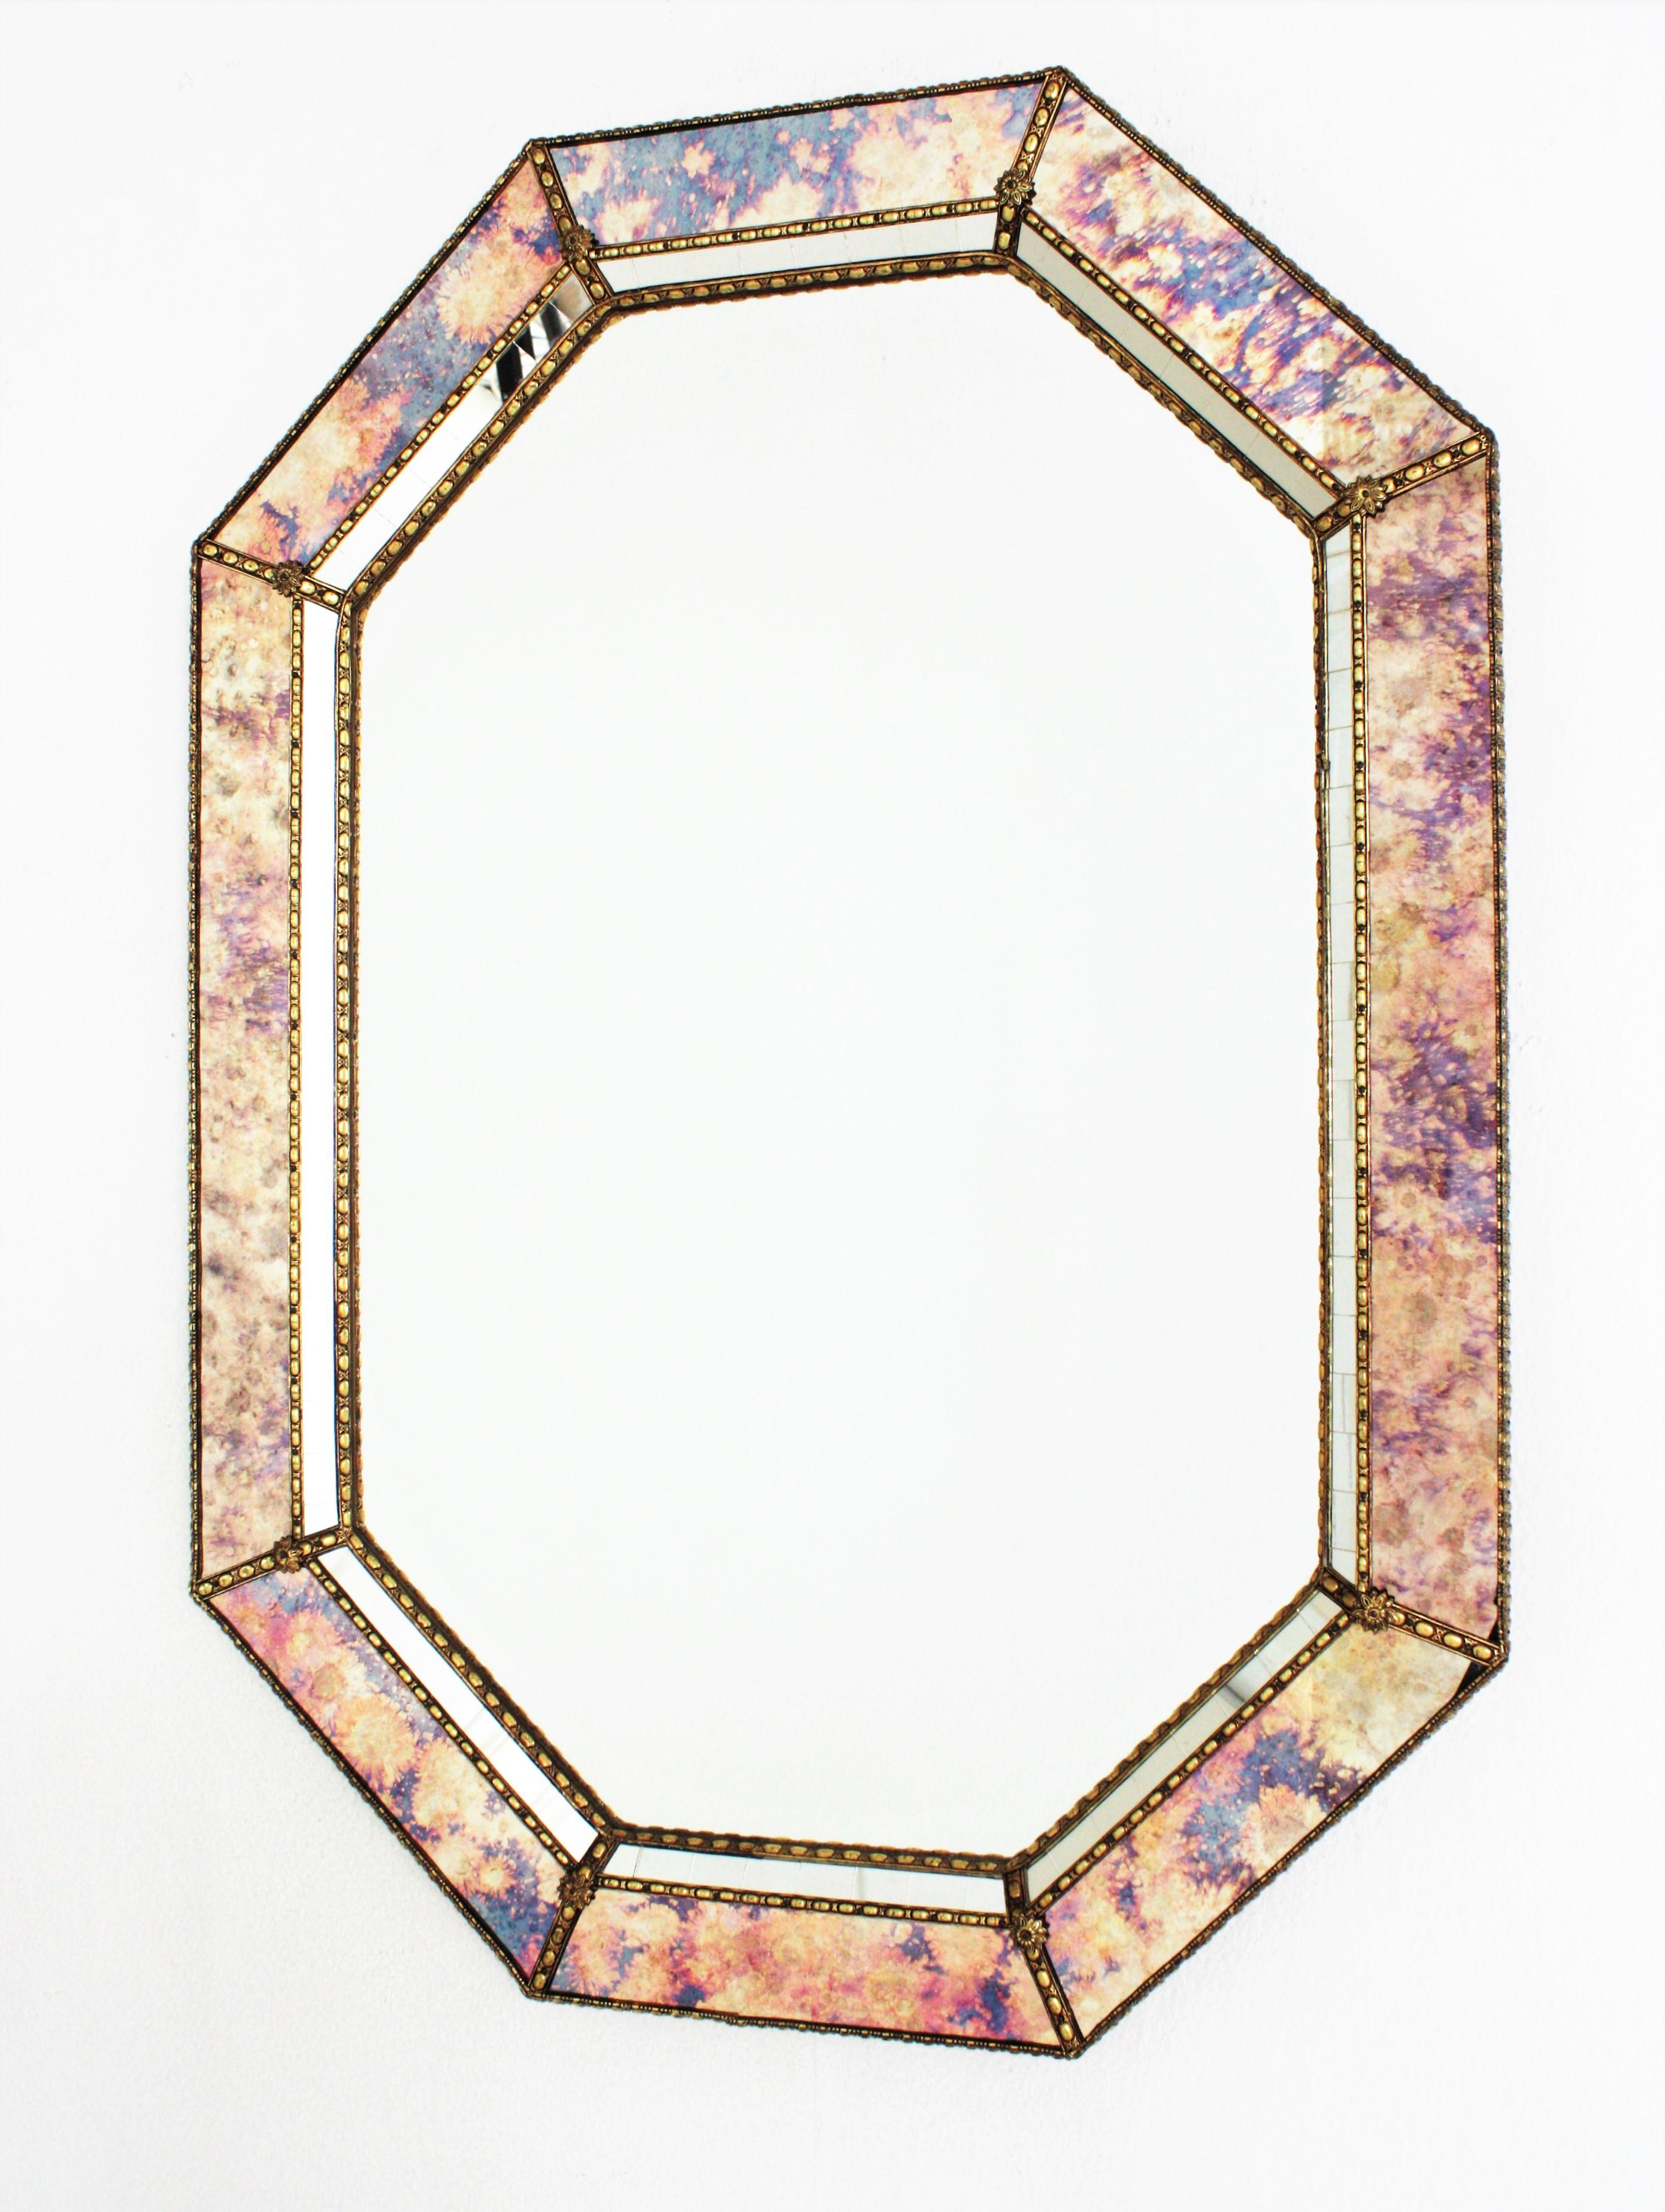 Metal Octagonal Venetian Style Mirror with Iridiscent Pink Purple Glass & Brass Detail For Sale